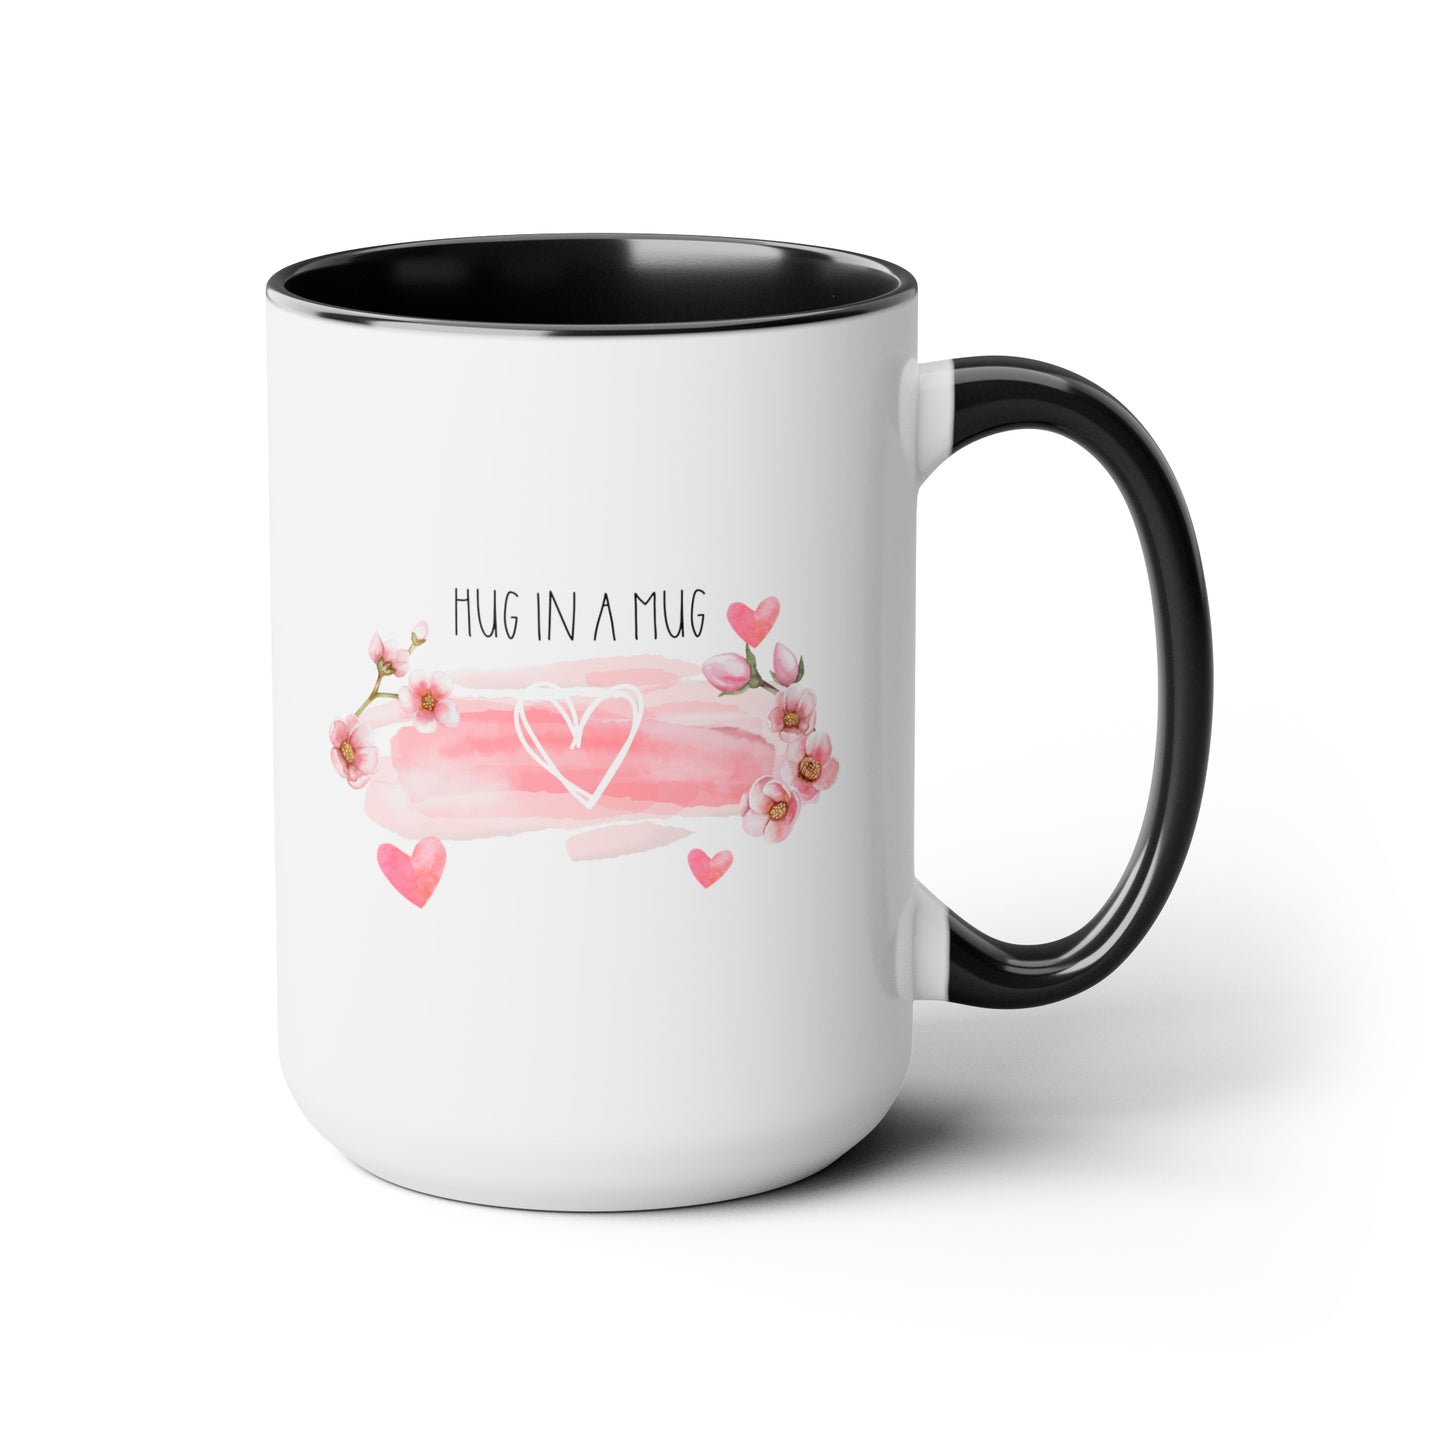 Hug In A Mug 15oz white with black accent funny large coffee mug gift for loved one mental health comforting uplifting encouraging anxiety waveywares wavey wares wavywares wavy wares